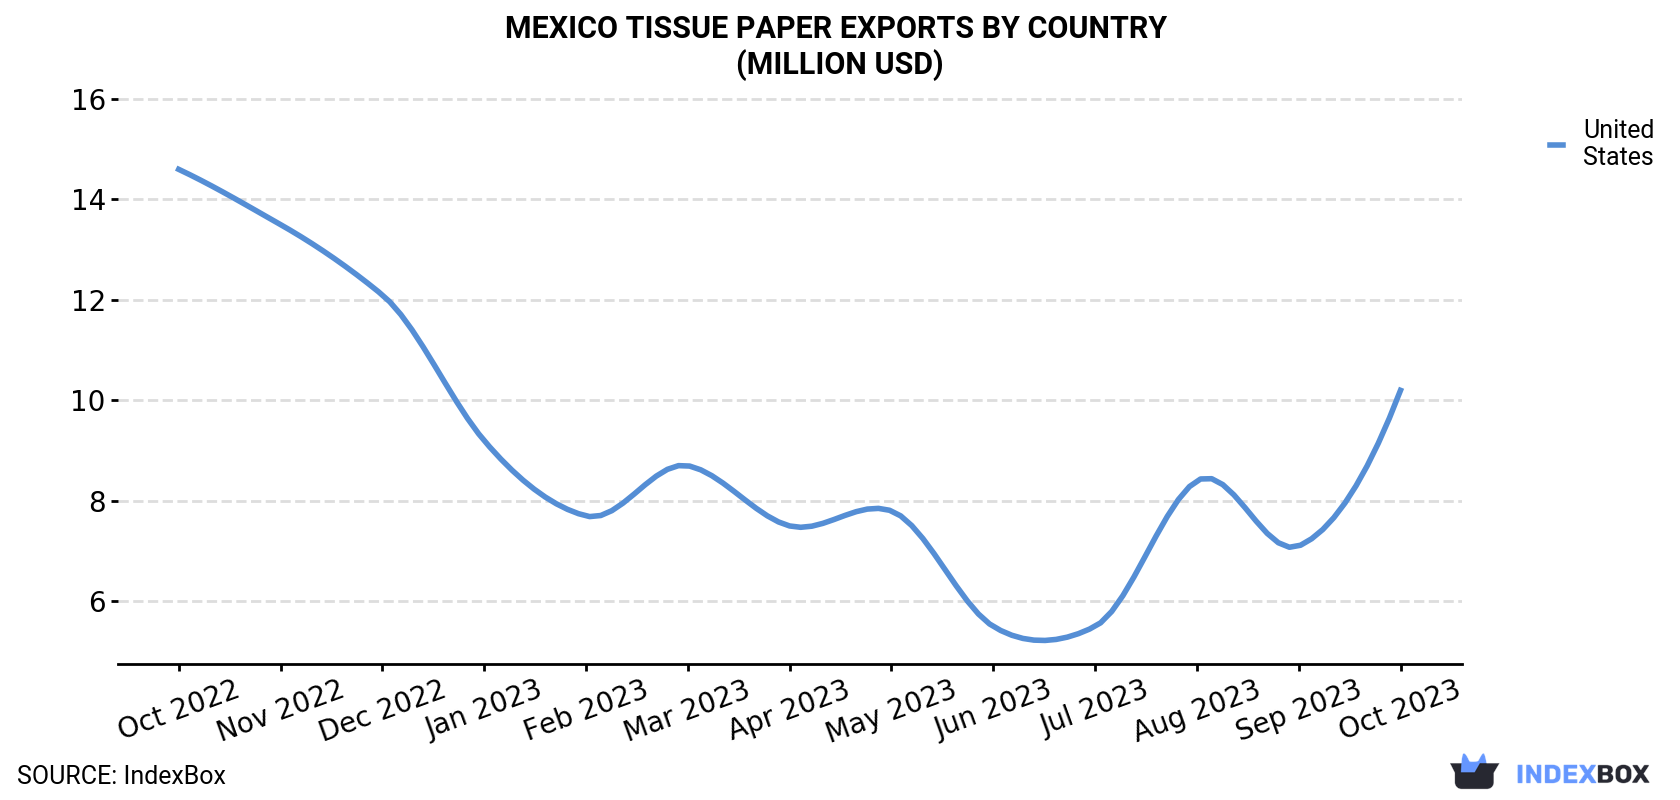 Mexico Tissue Paper Exports By Country (Million USD)